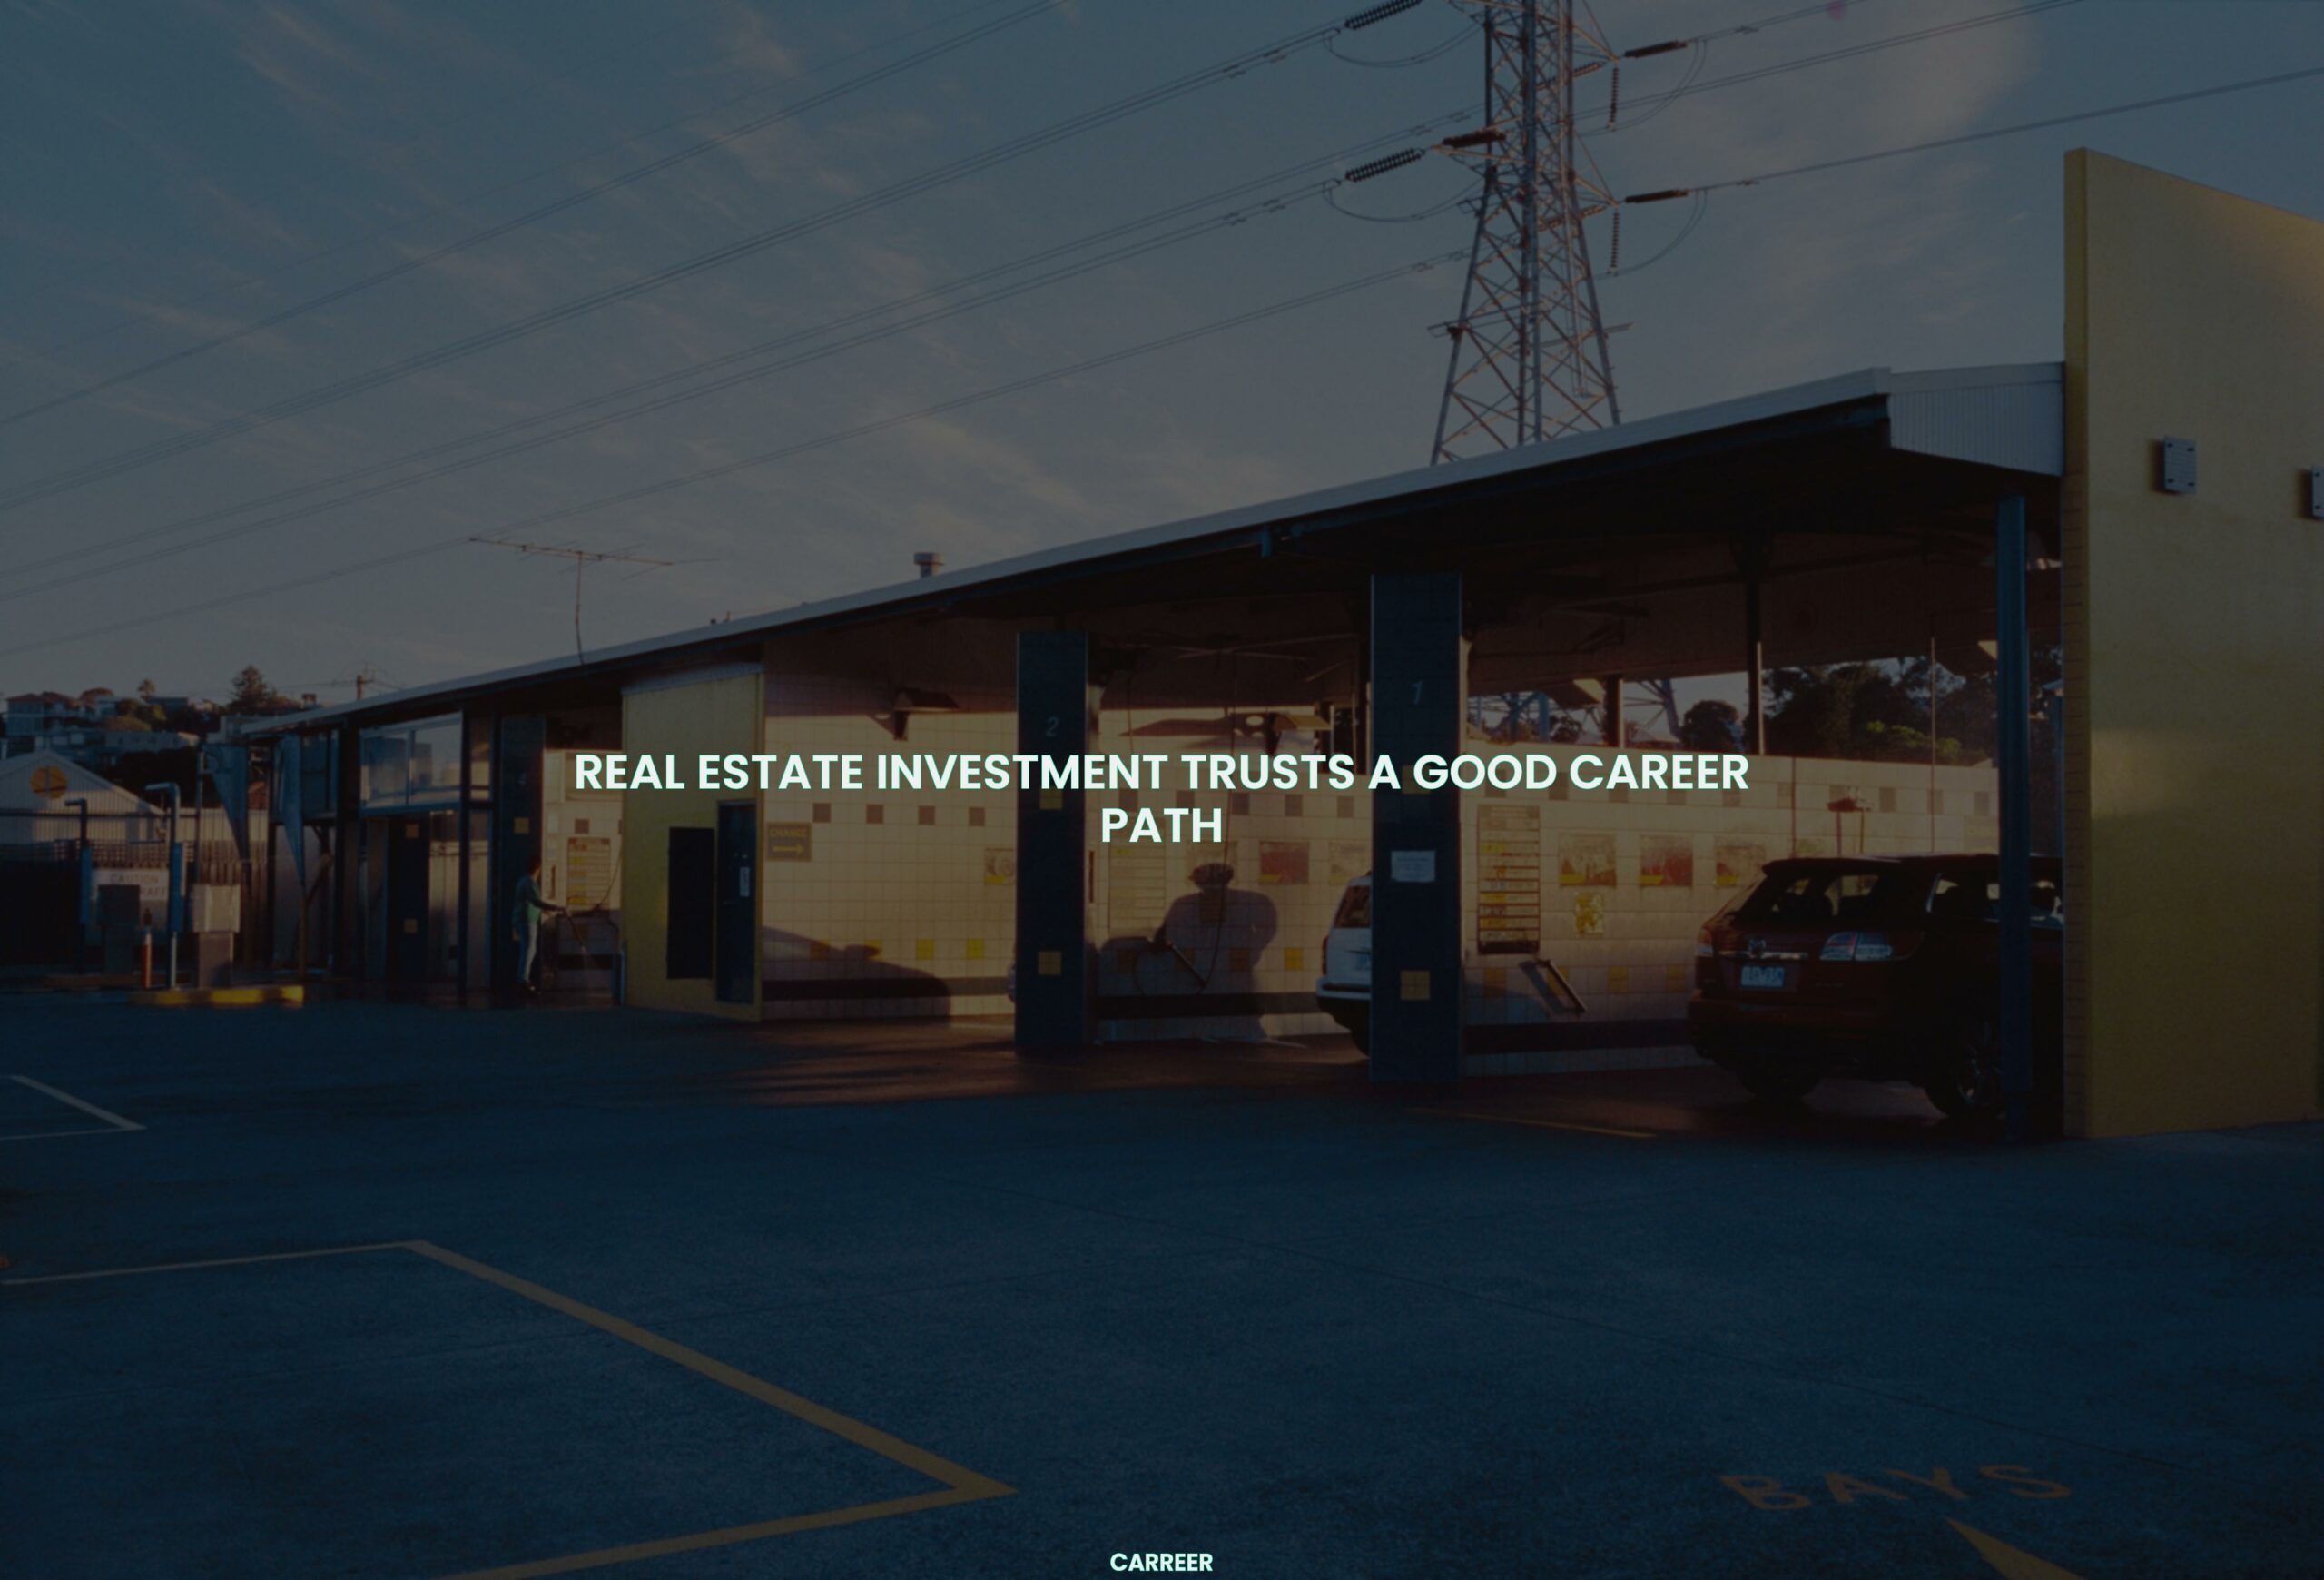 Real estate investment trusts a good career path